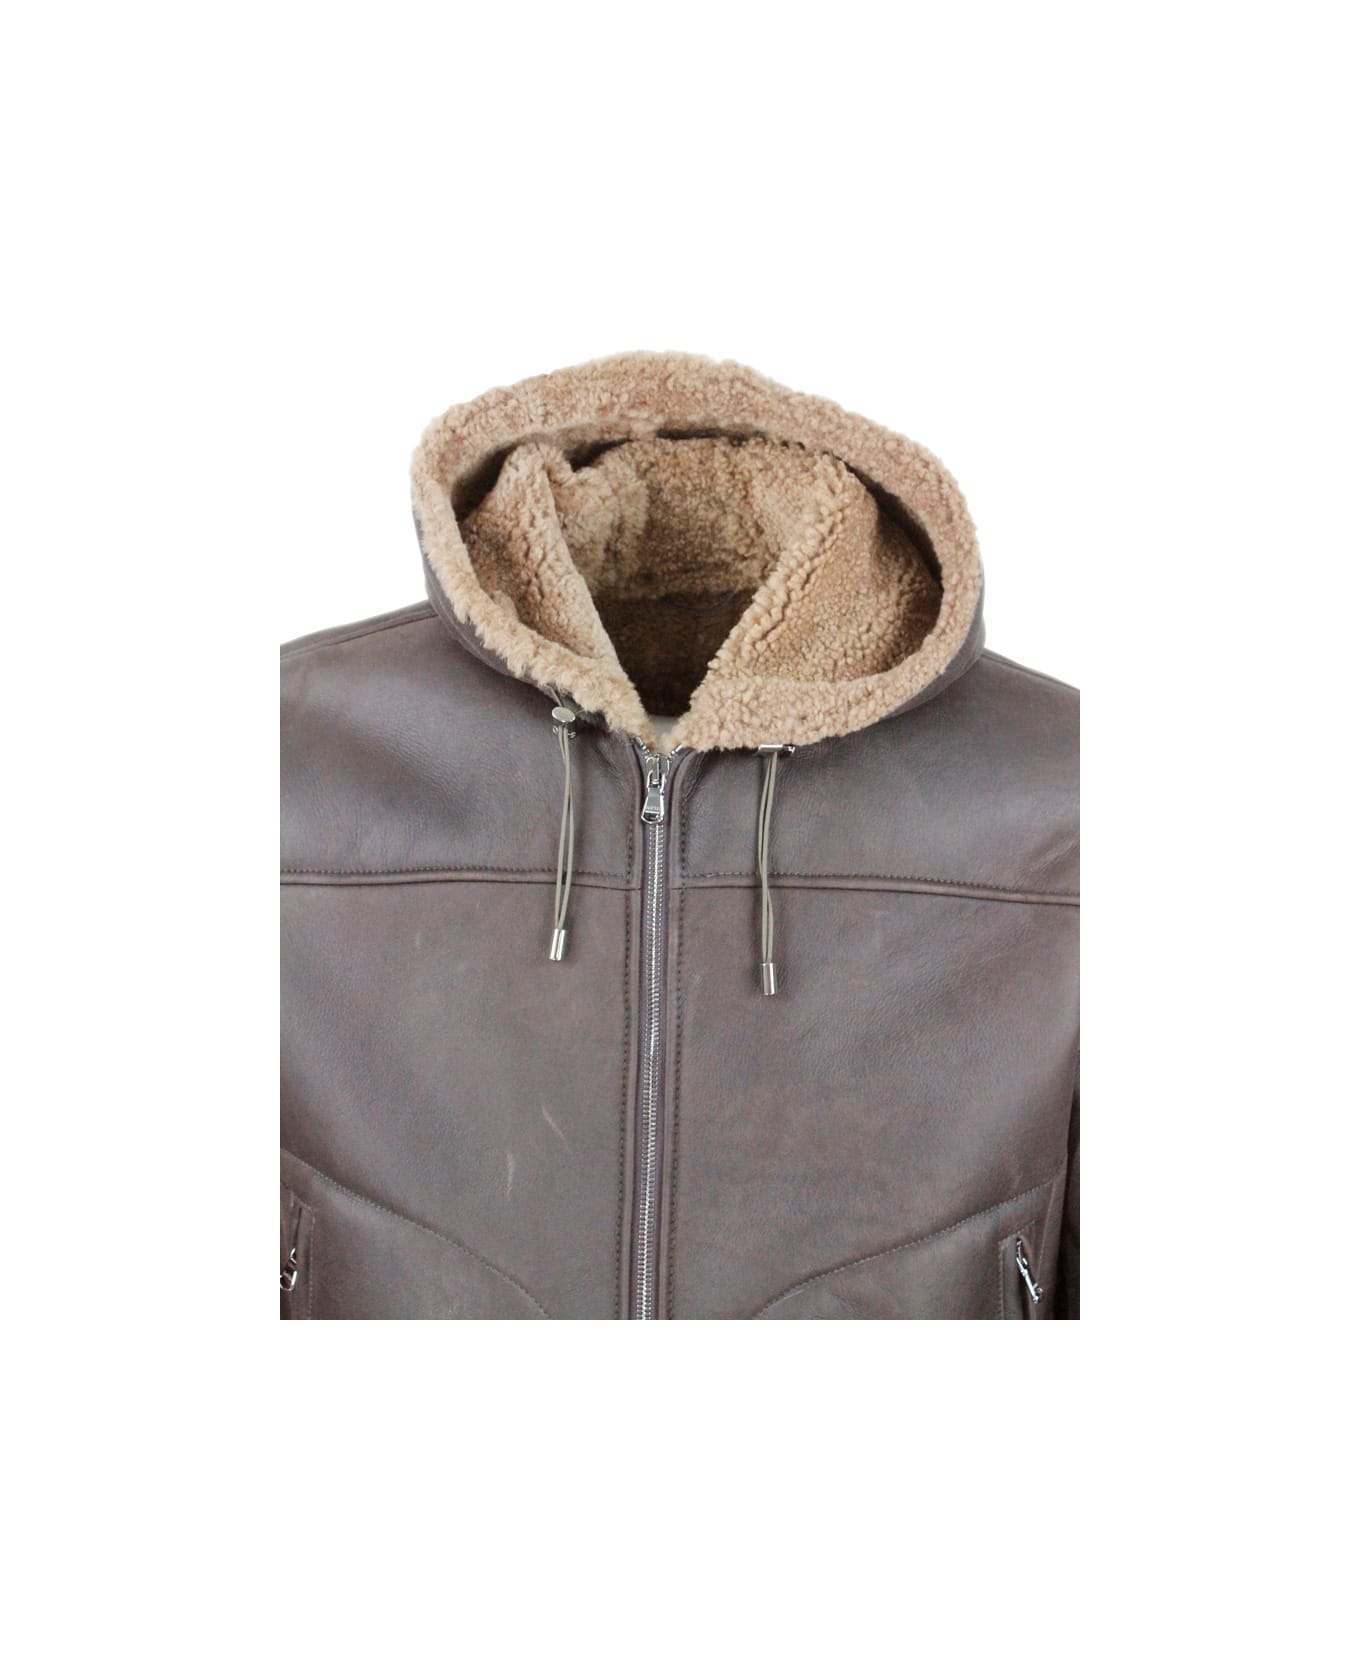 Barba Napoli Shearling Bomber Jacket With Hood With Drawstring And Trims In Stretch Knit And Zip Closure - Brown ジャケット